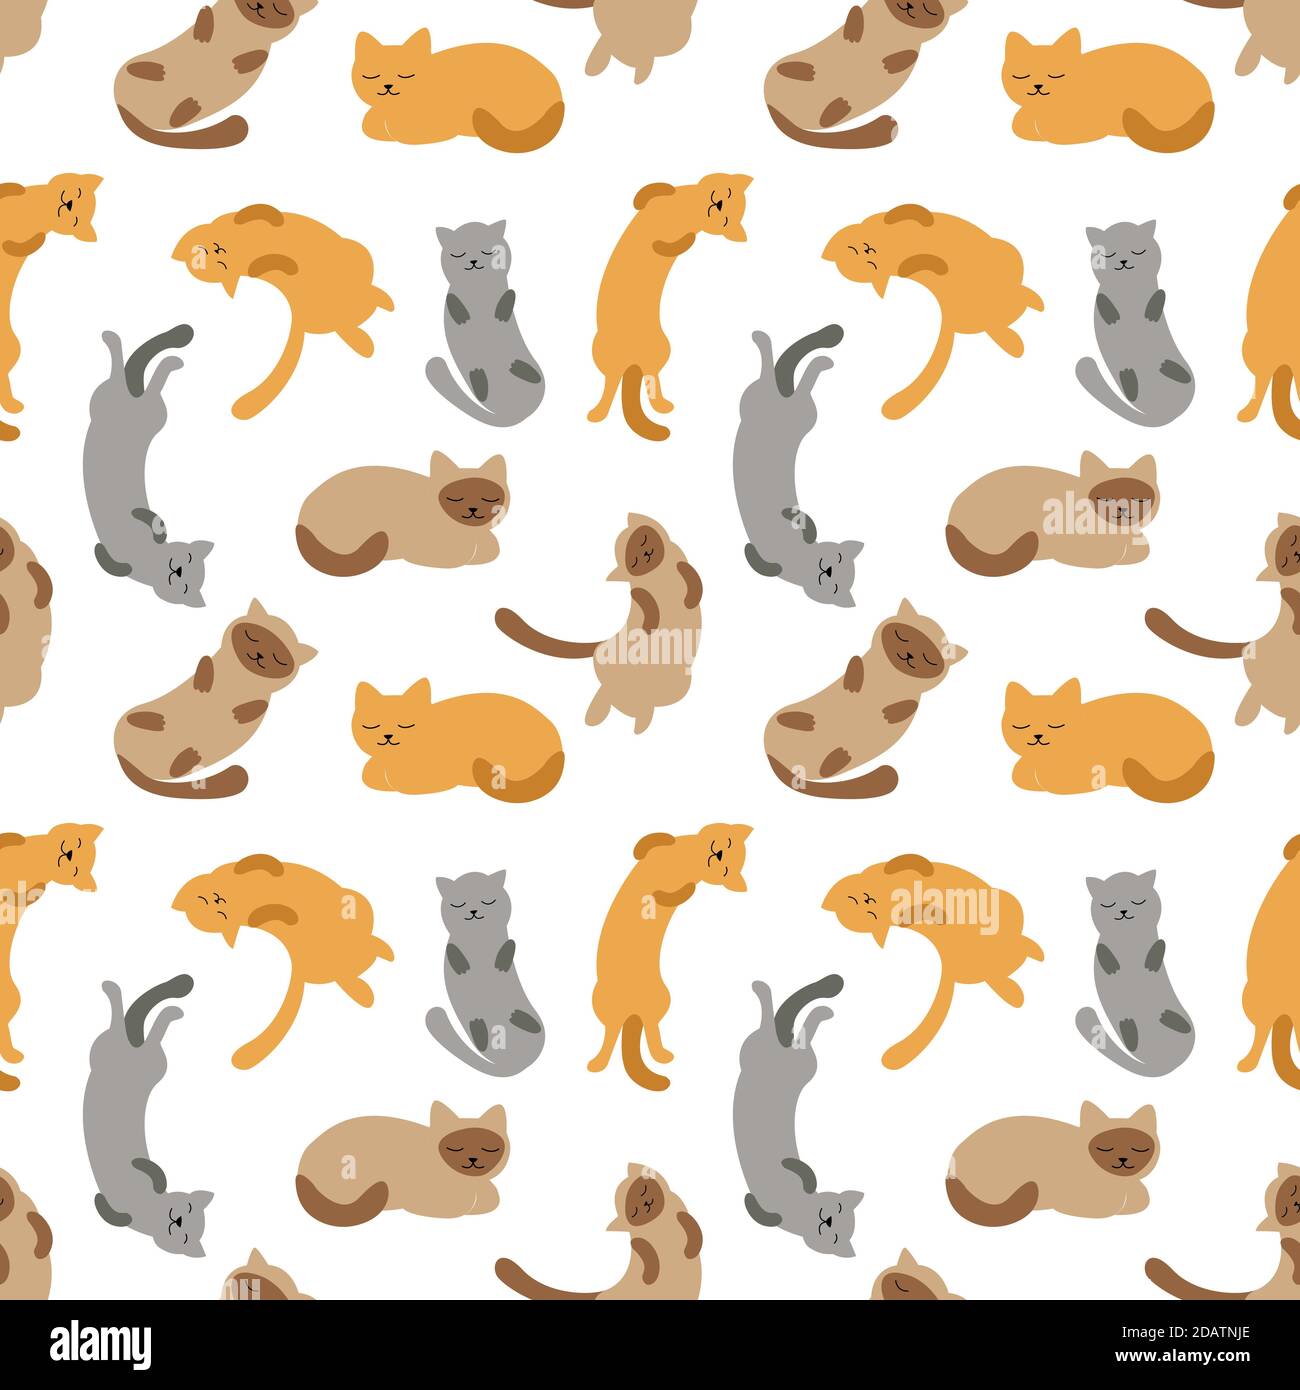 Seamless pattern sleeping cats of different breeds vector illustration Stock Vector